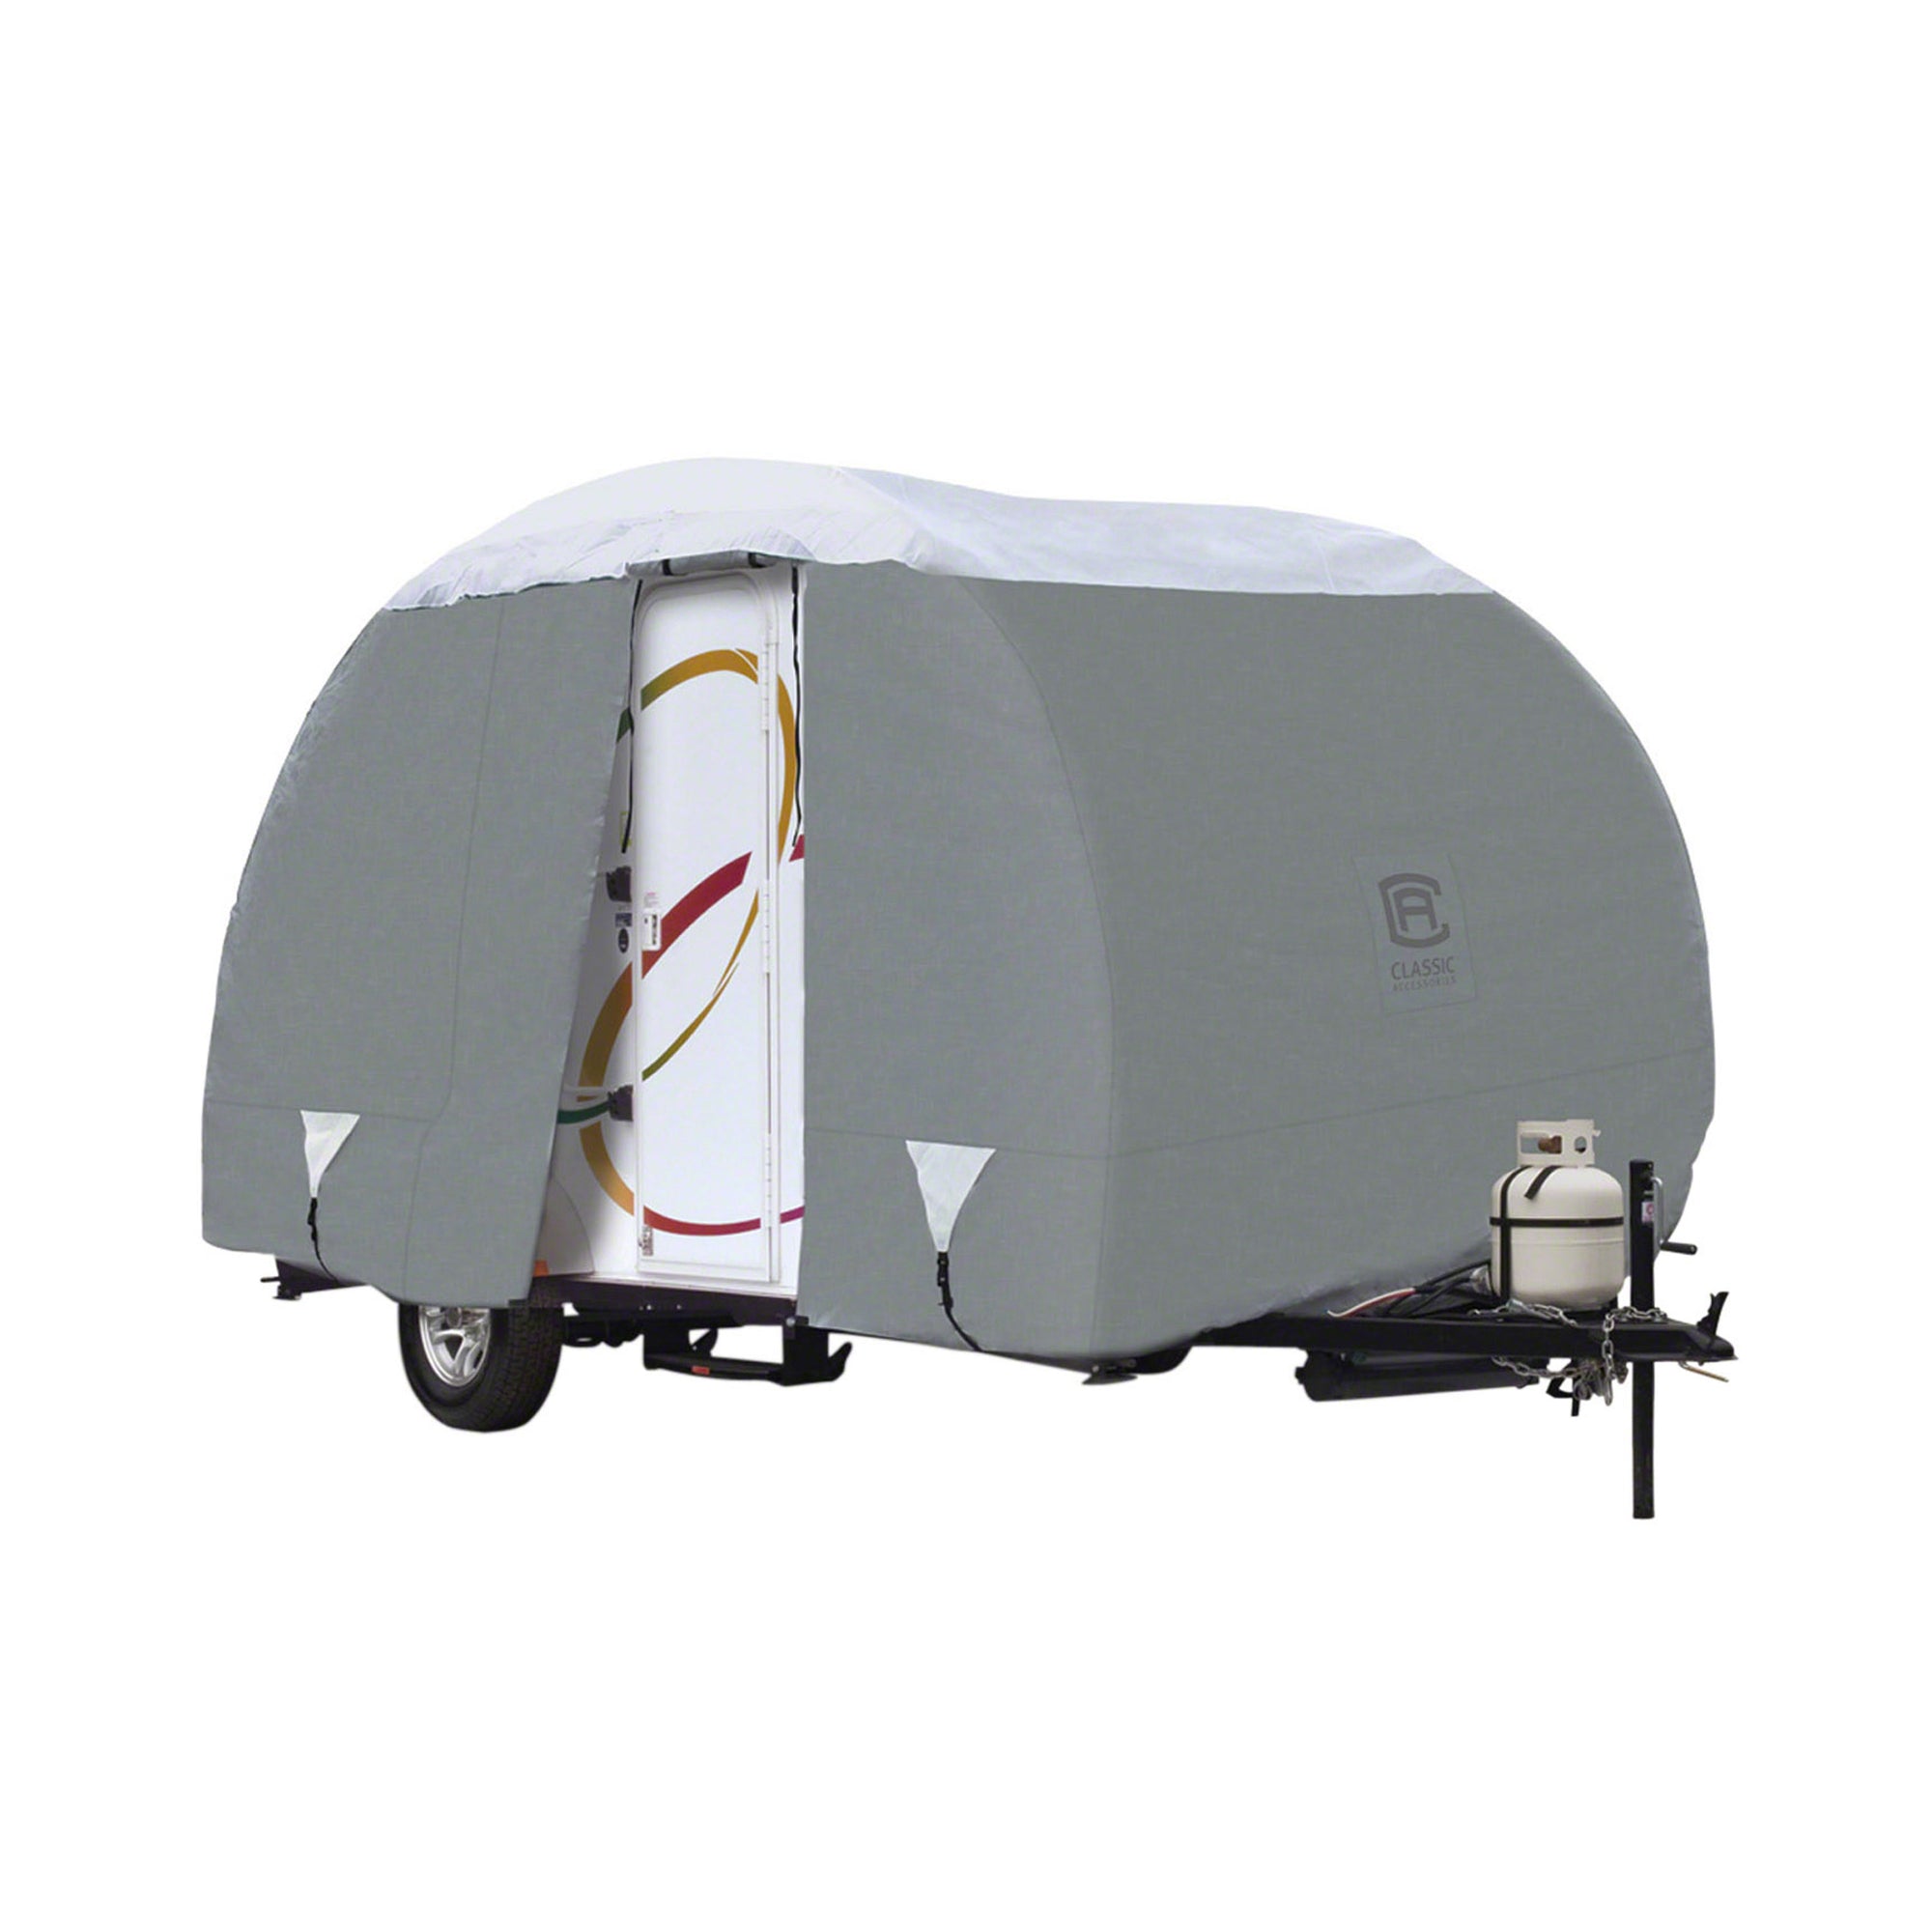 Classic Accessories 80-199-151001-00 PolyPRO 3 R-Pod Trailer Cover - 16' 7" to 18' 8"